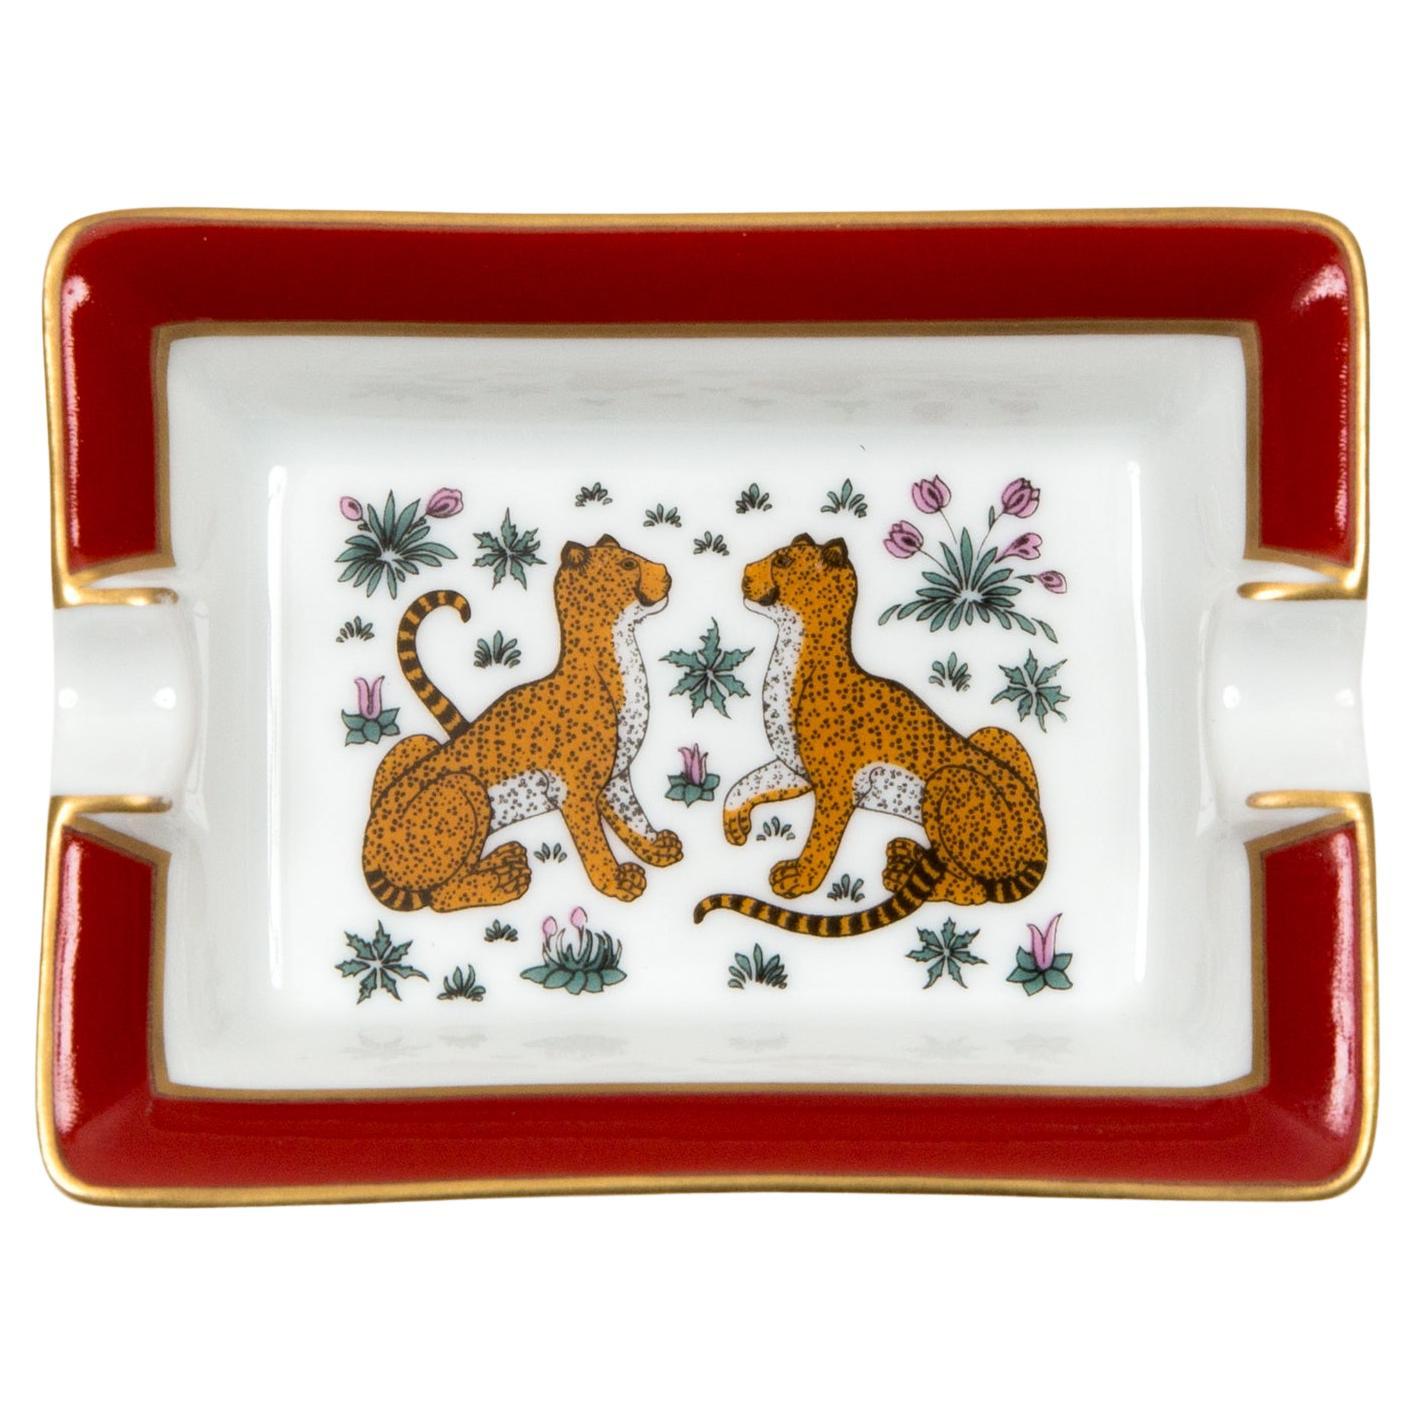 Hermes Leopard Porcelain Small Size Ashtray or Organizer For Sale